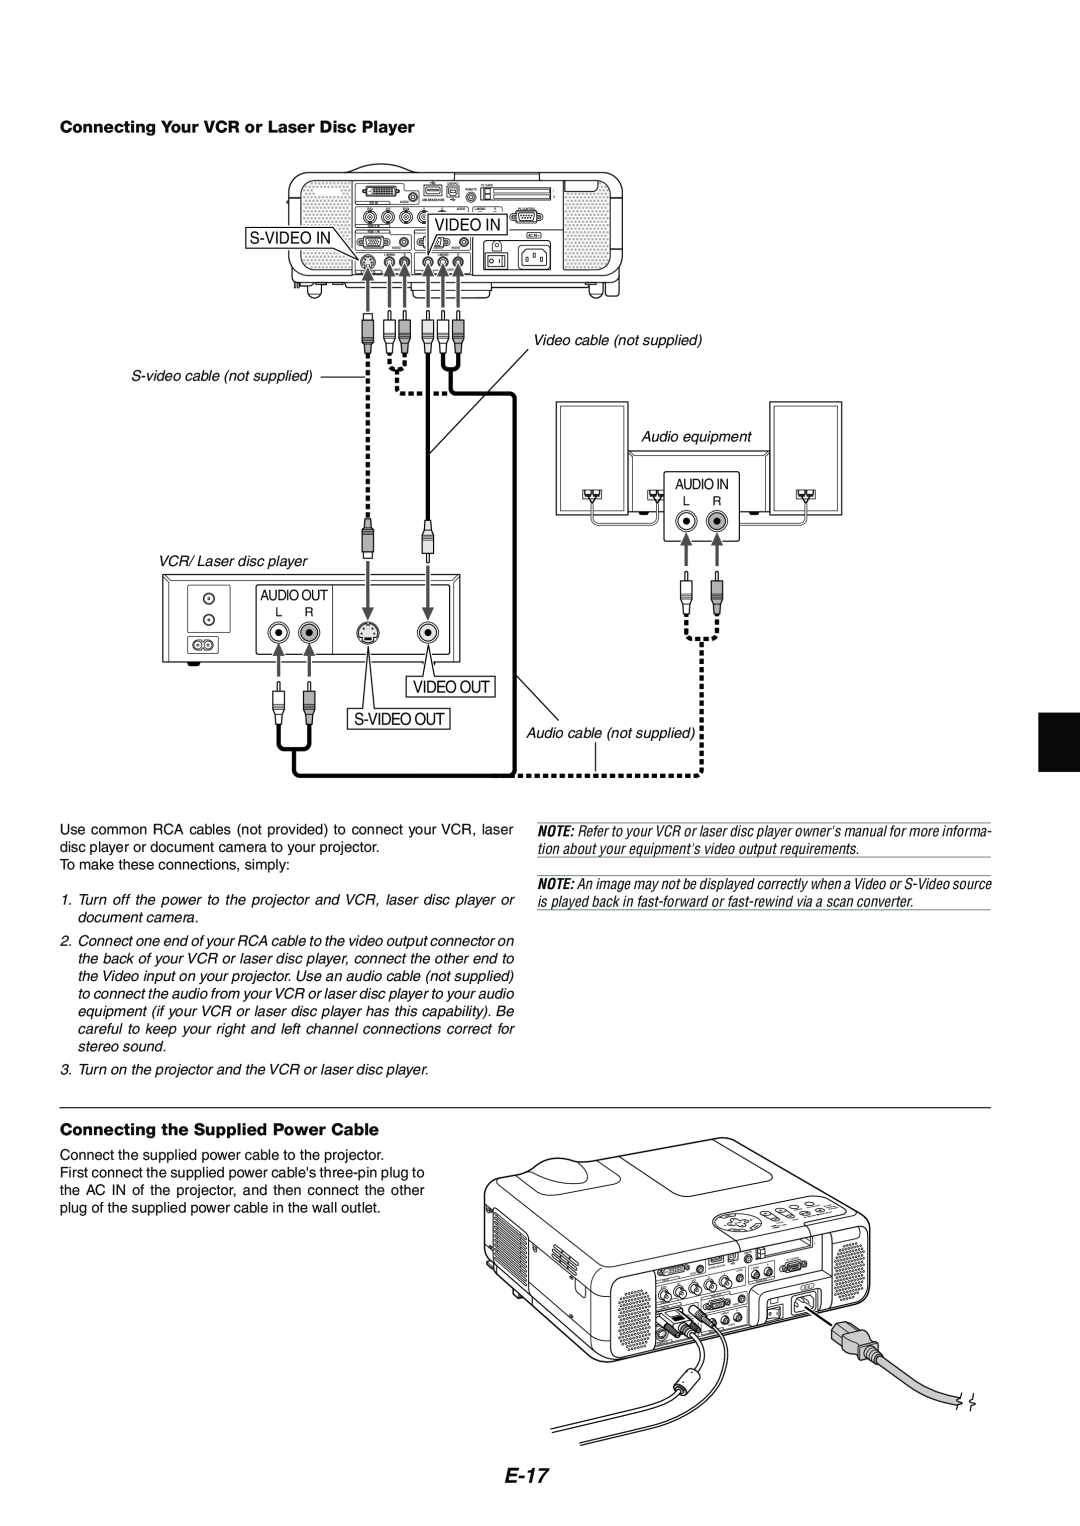 NEC MT1065/MT1060 user manual E-17, Connecting Your VCR or Laser Disc Player, Connecting the Supplied Power Cable 